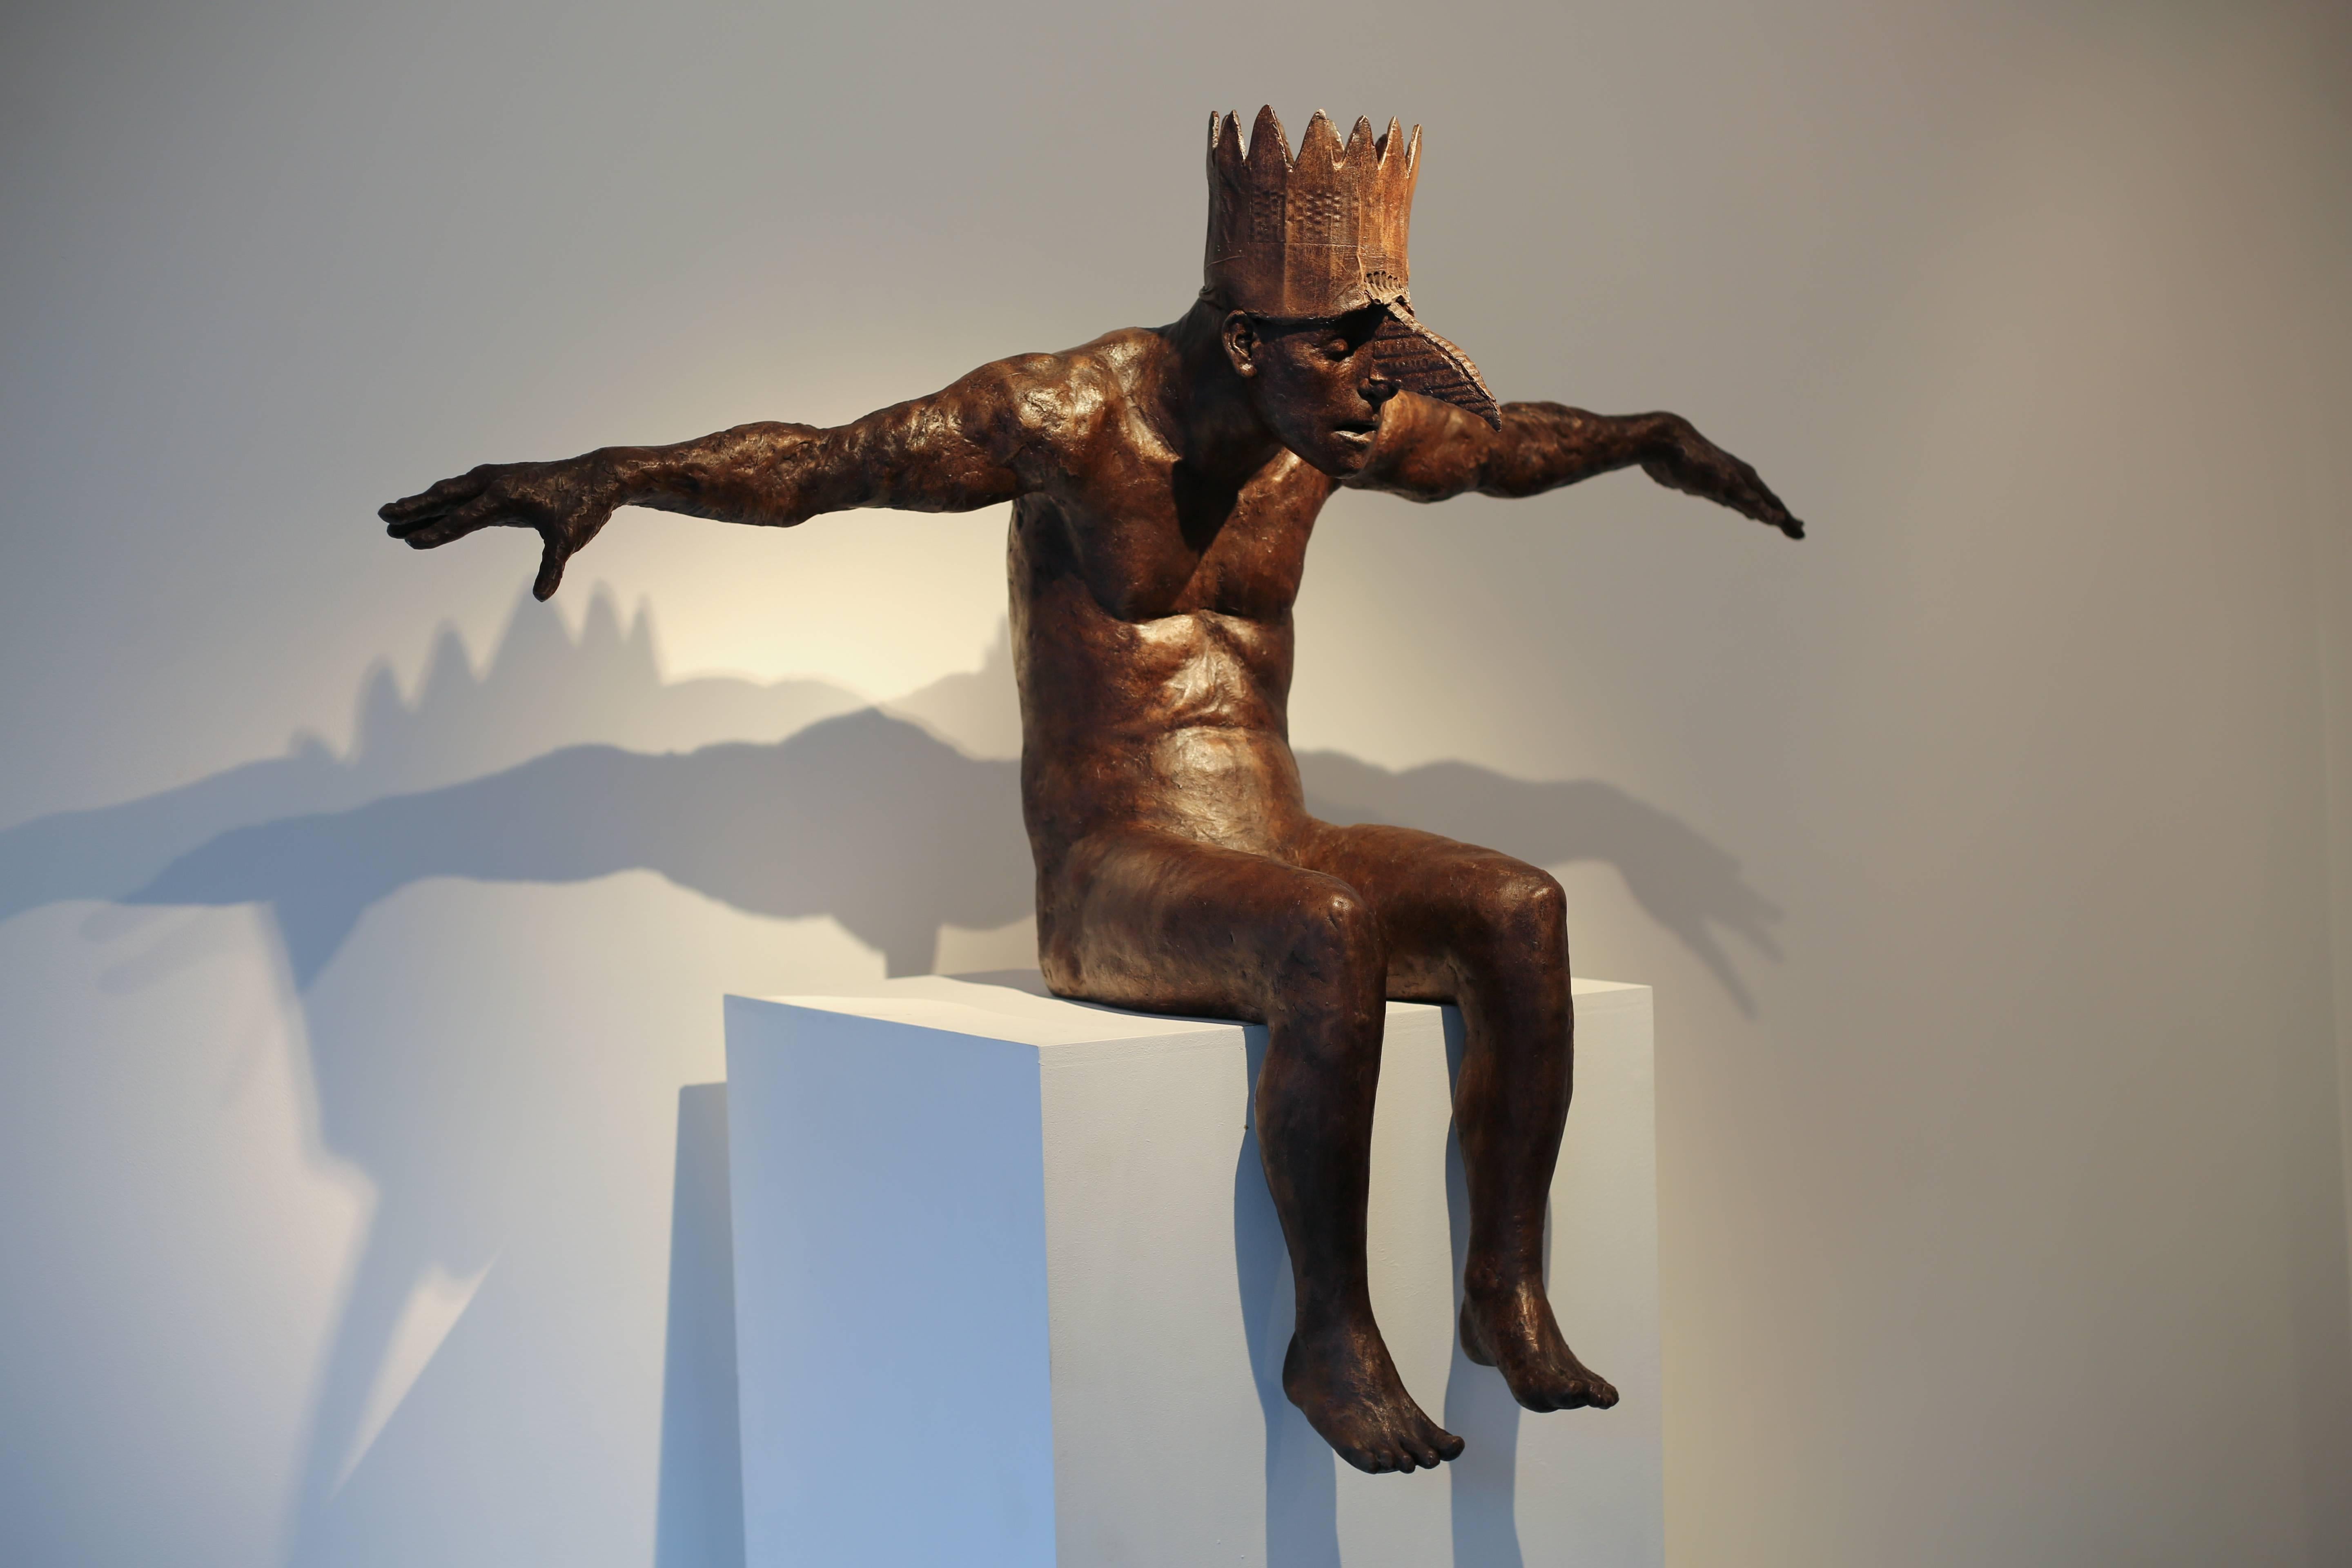 This modern contemporary figurative sculpture, is a bronze casting of human figure with crown with a fantasy quality. The arms are spread like wings with a human head and bird beak, slouched and seated, forward reaching posture.

Anyone who shares